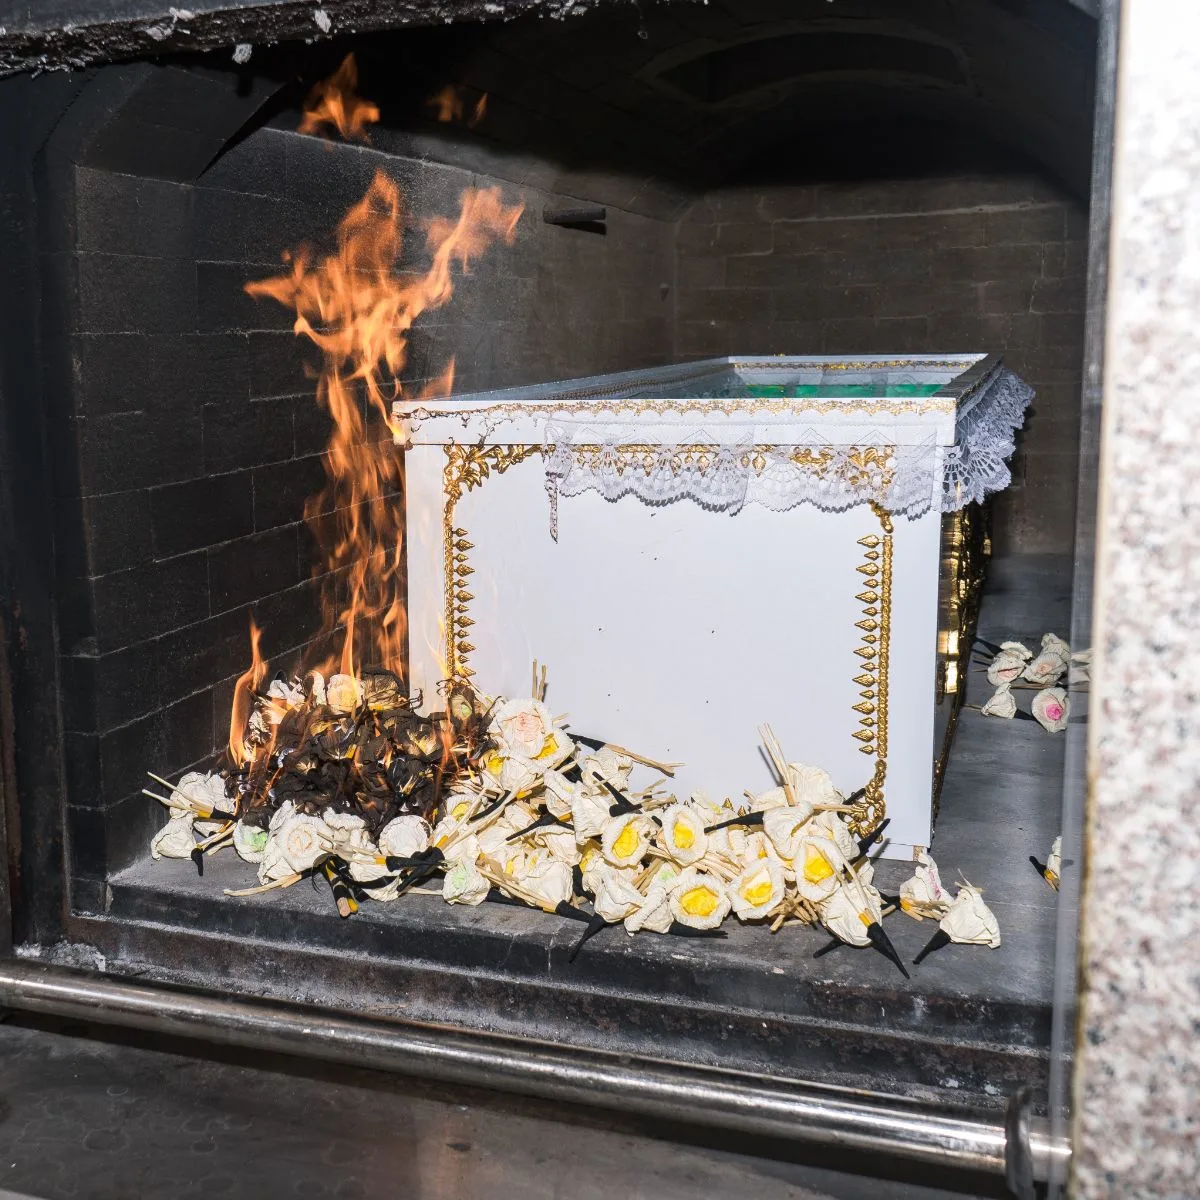 where in the bible does it talk about cremation